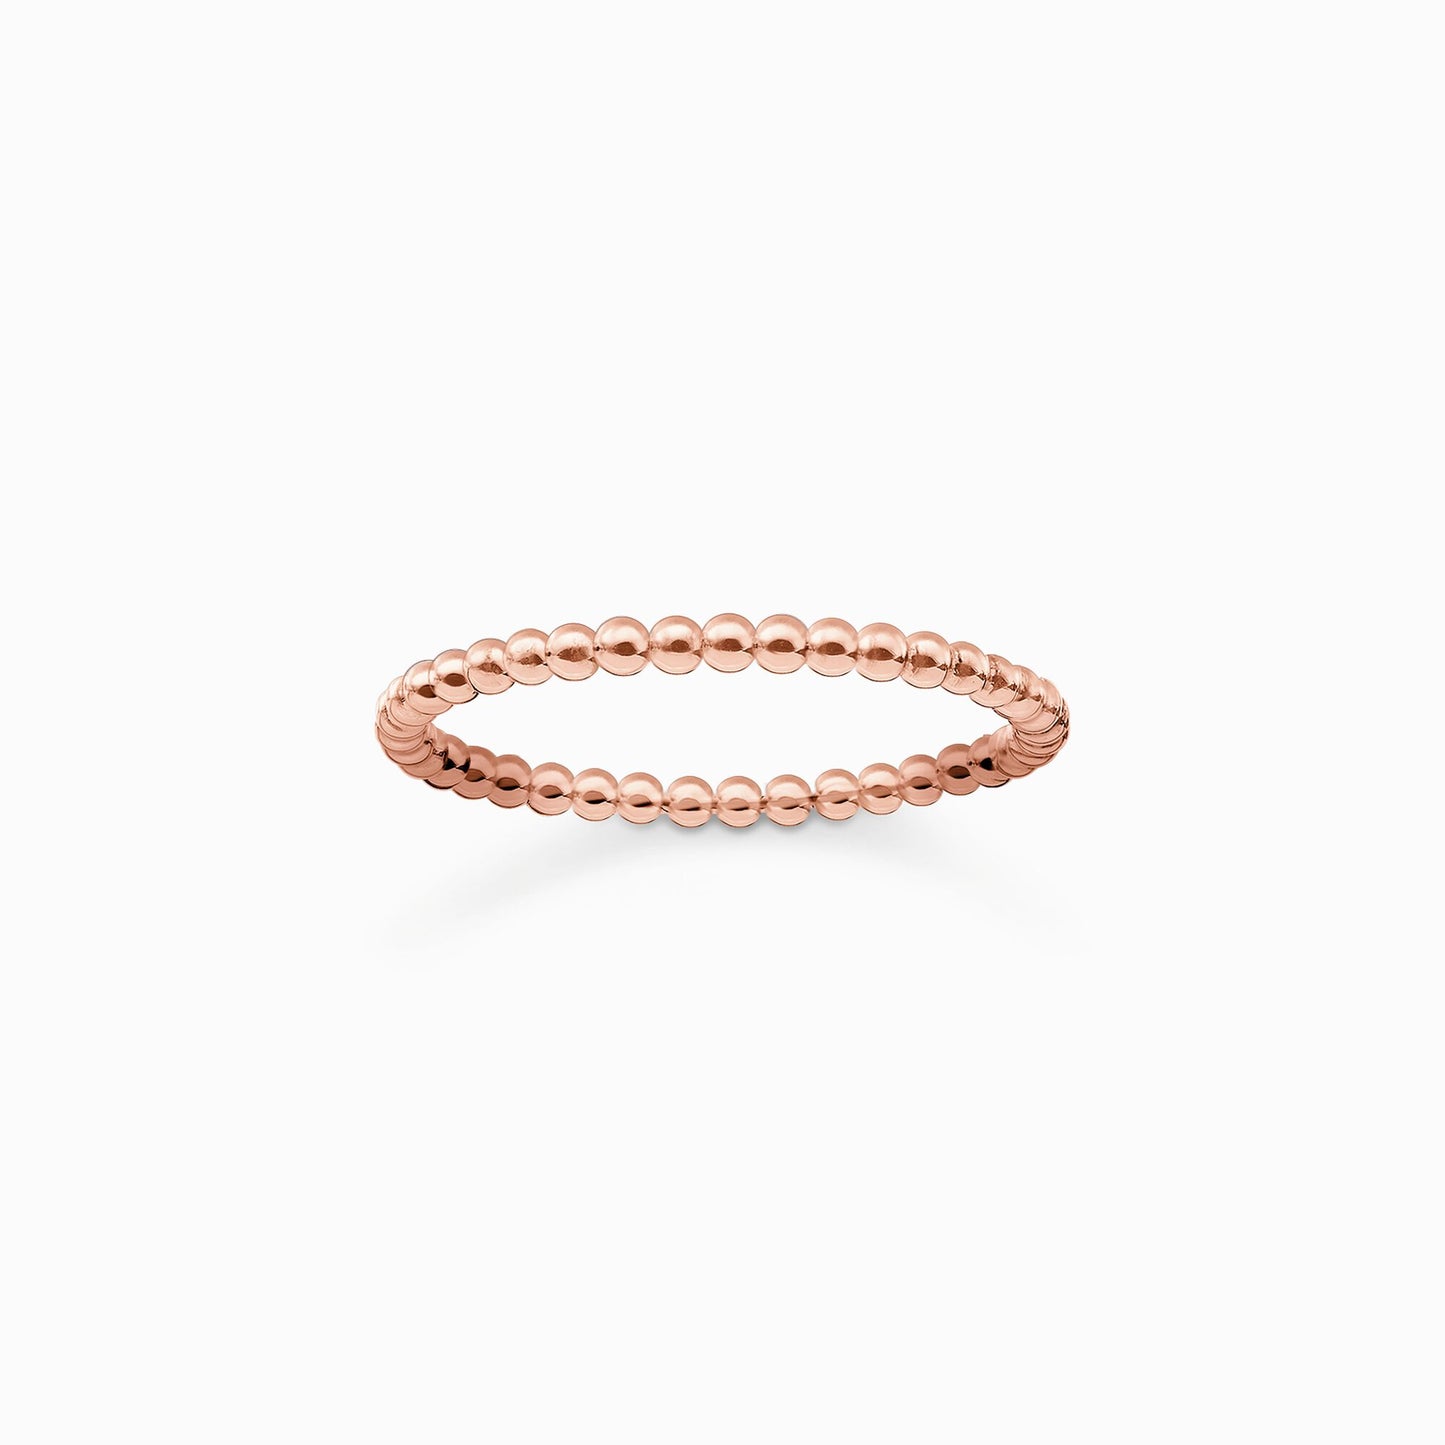 Thomas Sabo Rose Gold Plated Beaded Band Size 56 TR2122-415-12